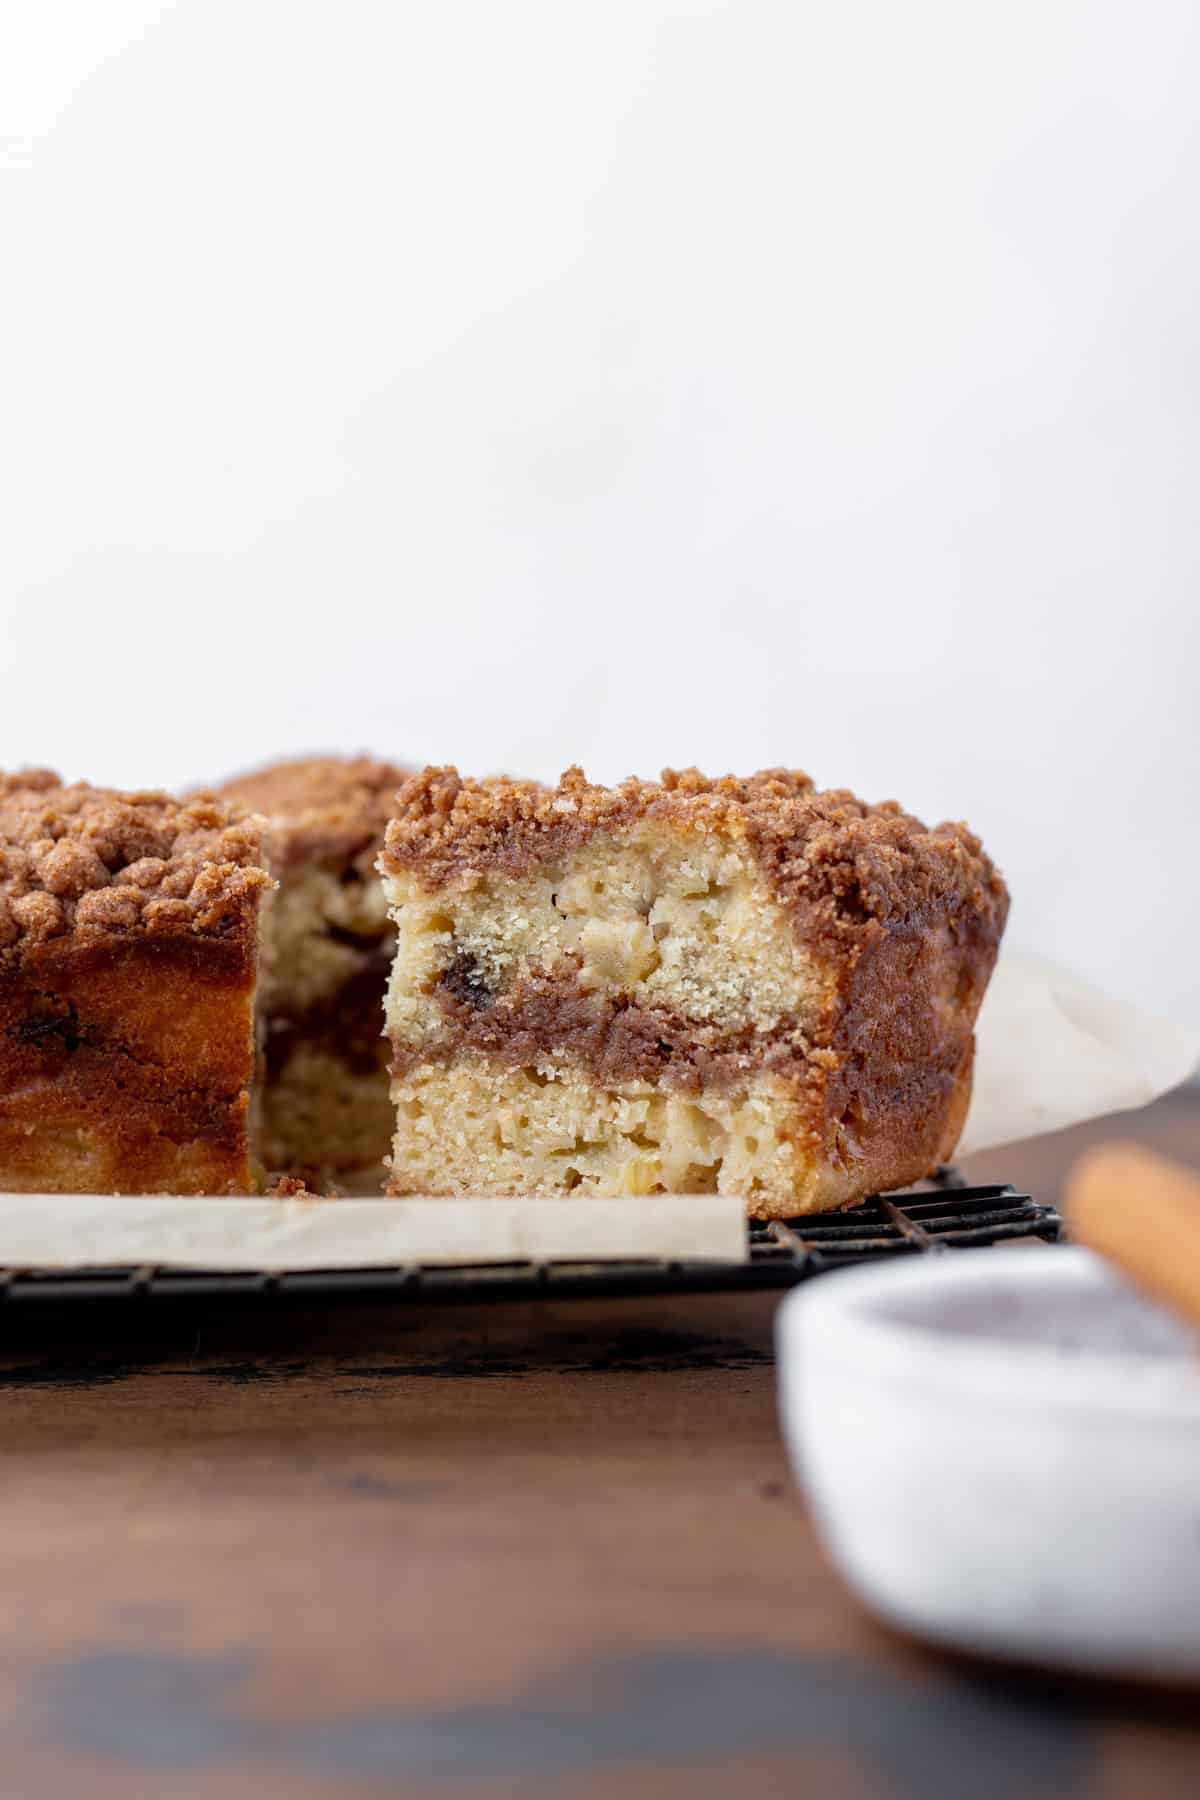 A slice of apple cider and date coffee cake with a swirl of cinnamon sugar in the middle.